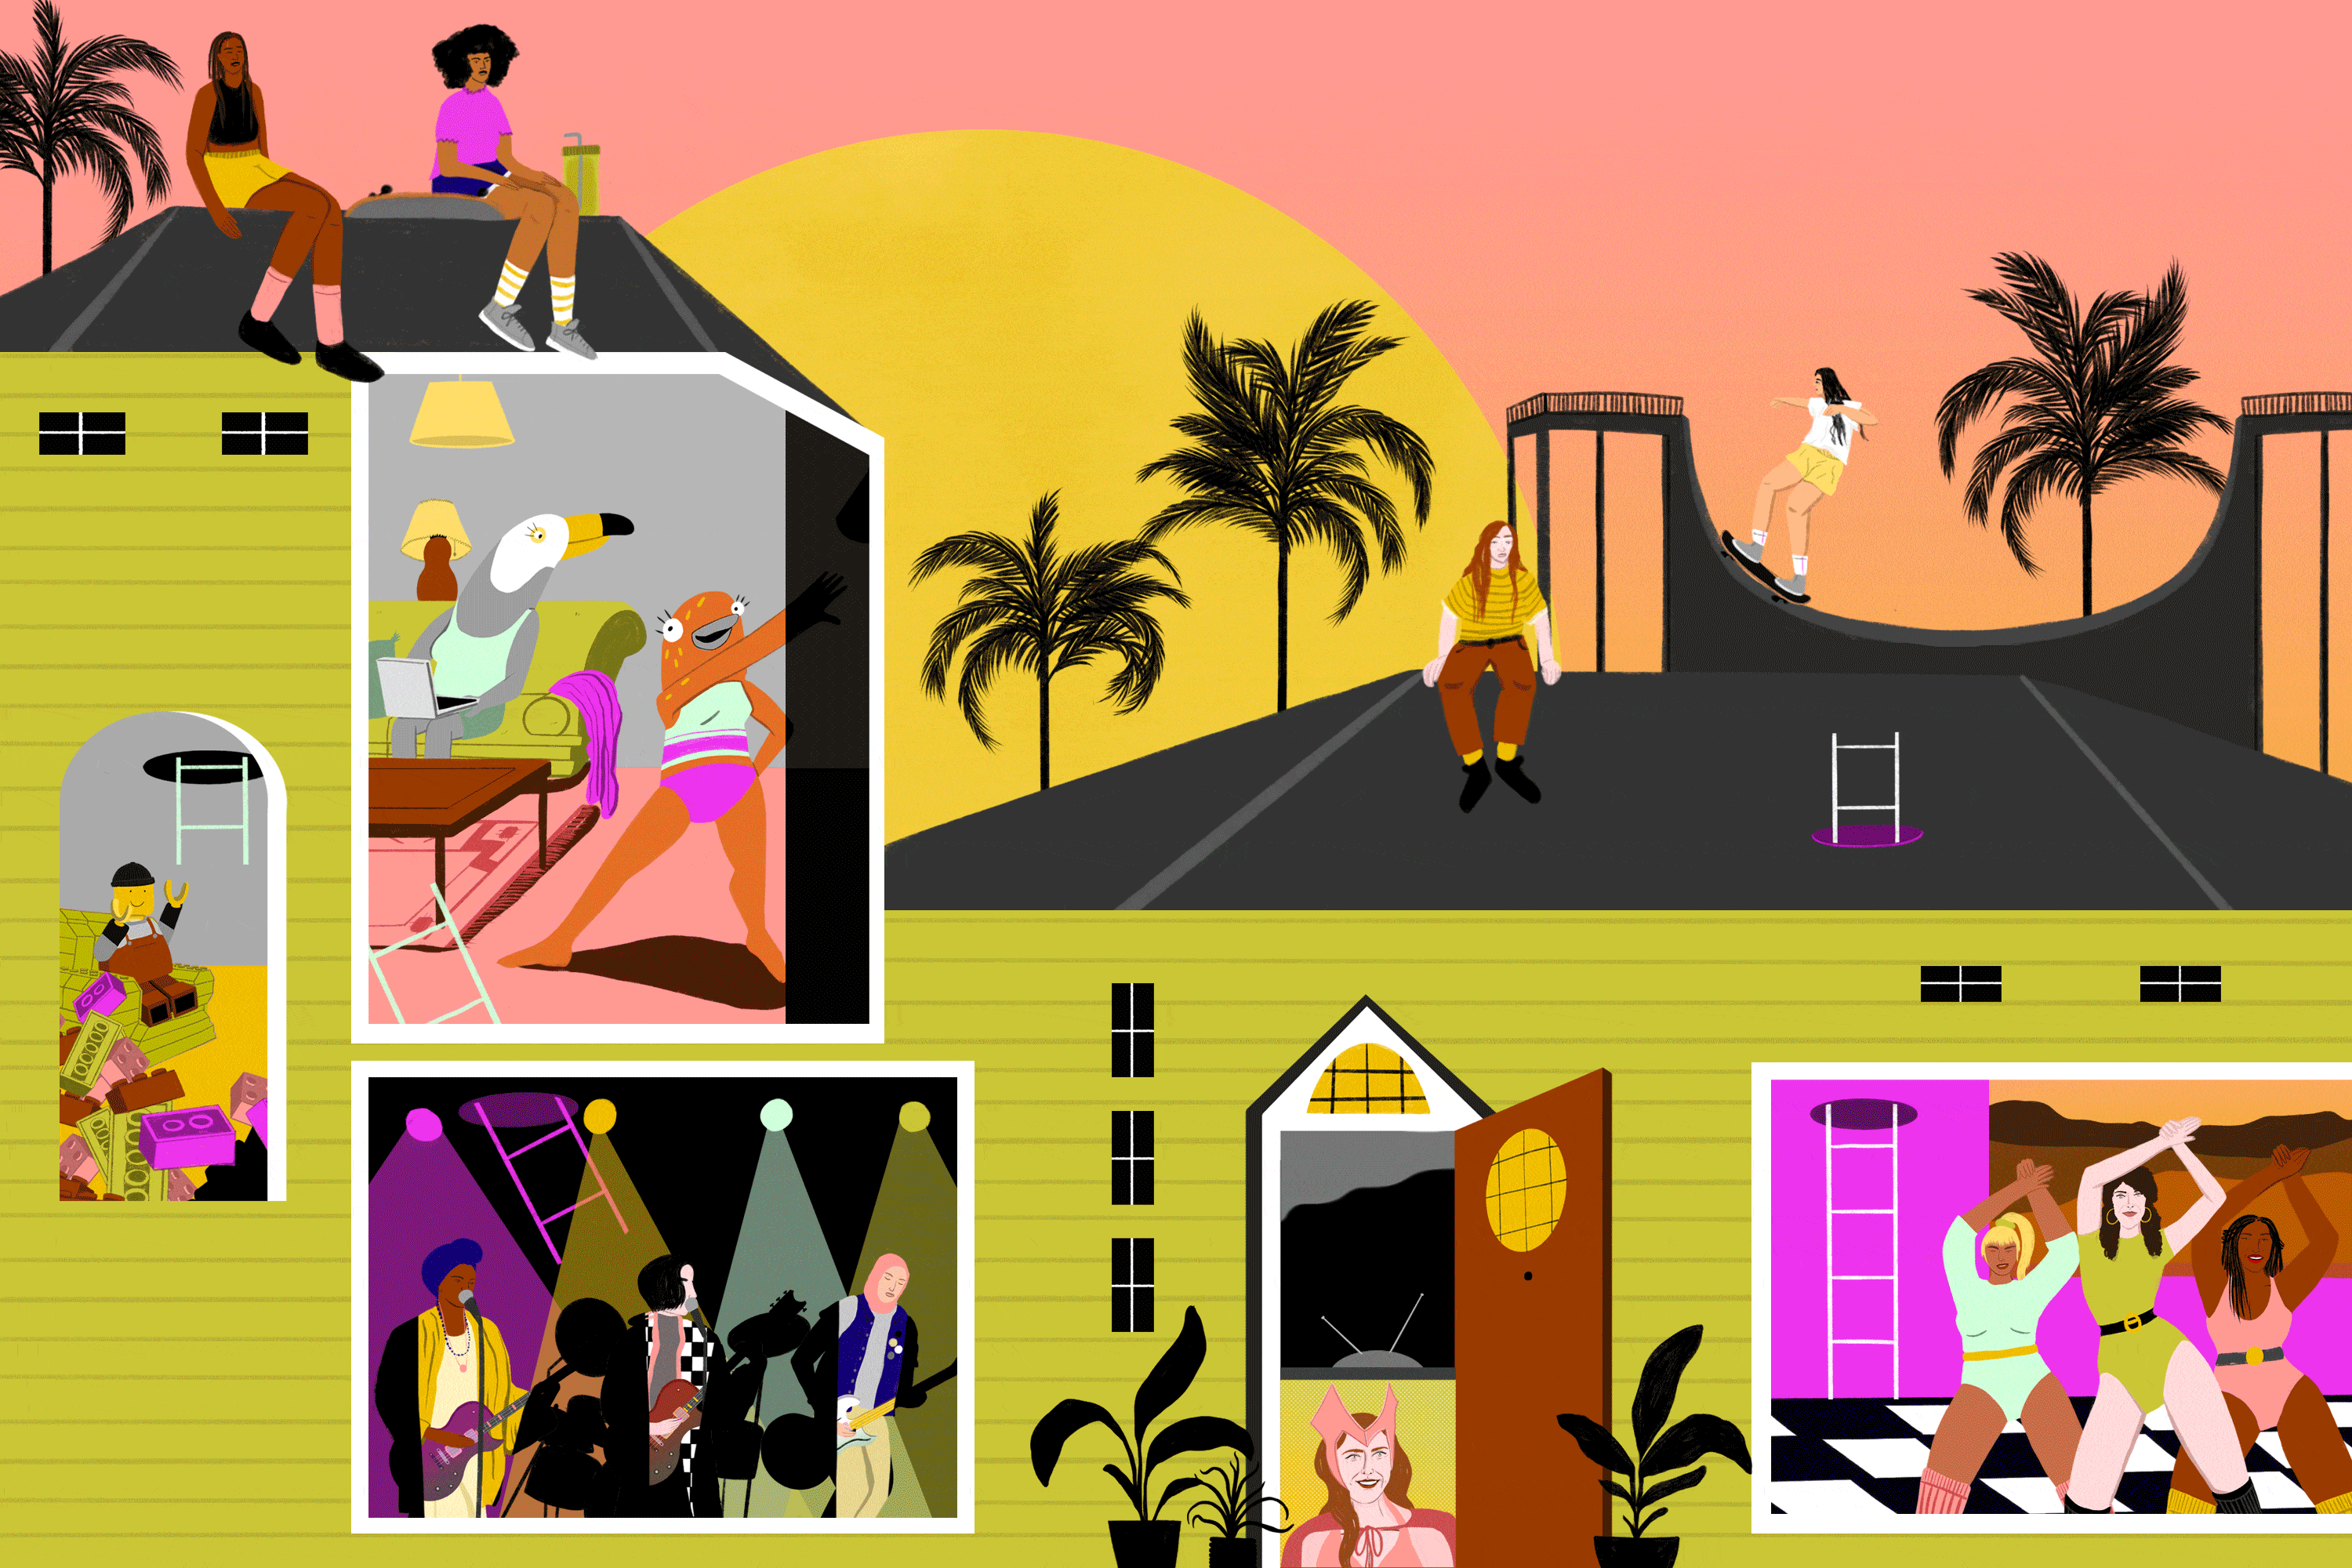 An illustration of the rooms in a house, with activities inspired by summer TV shows.